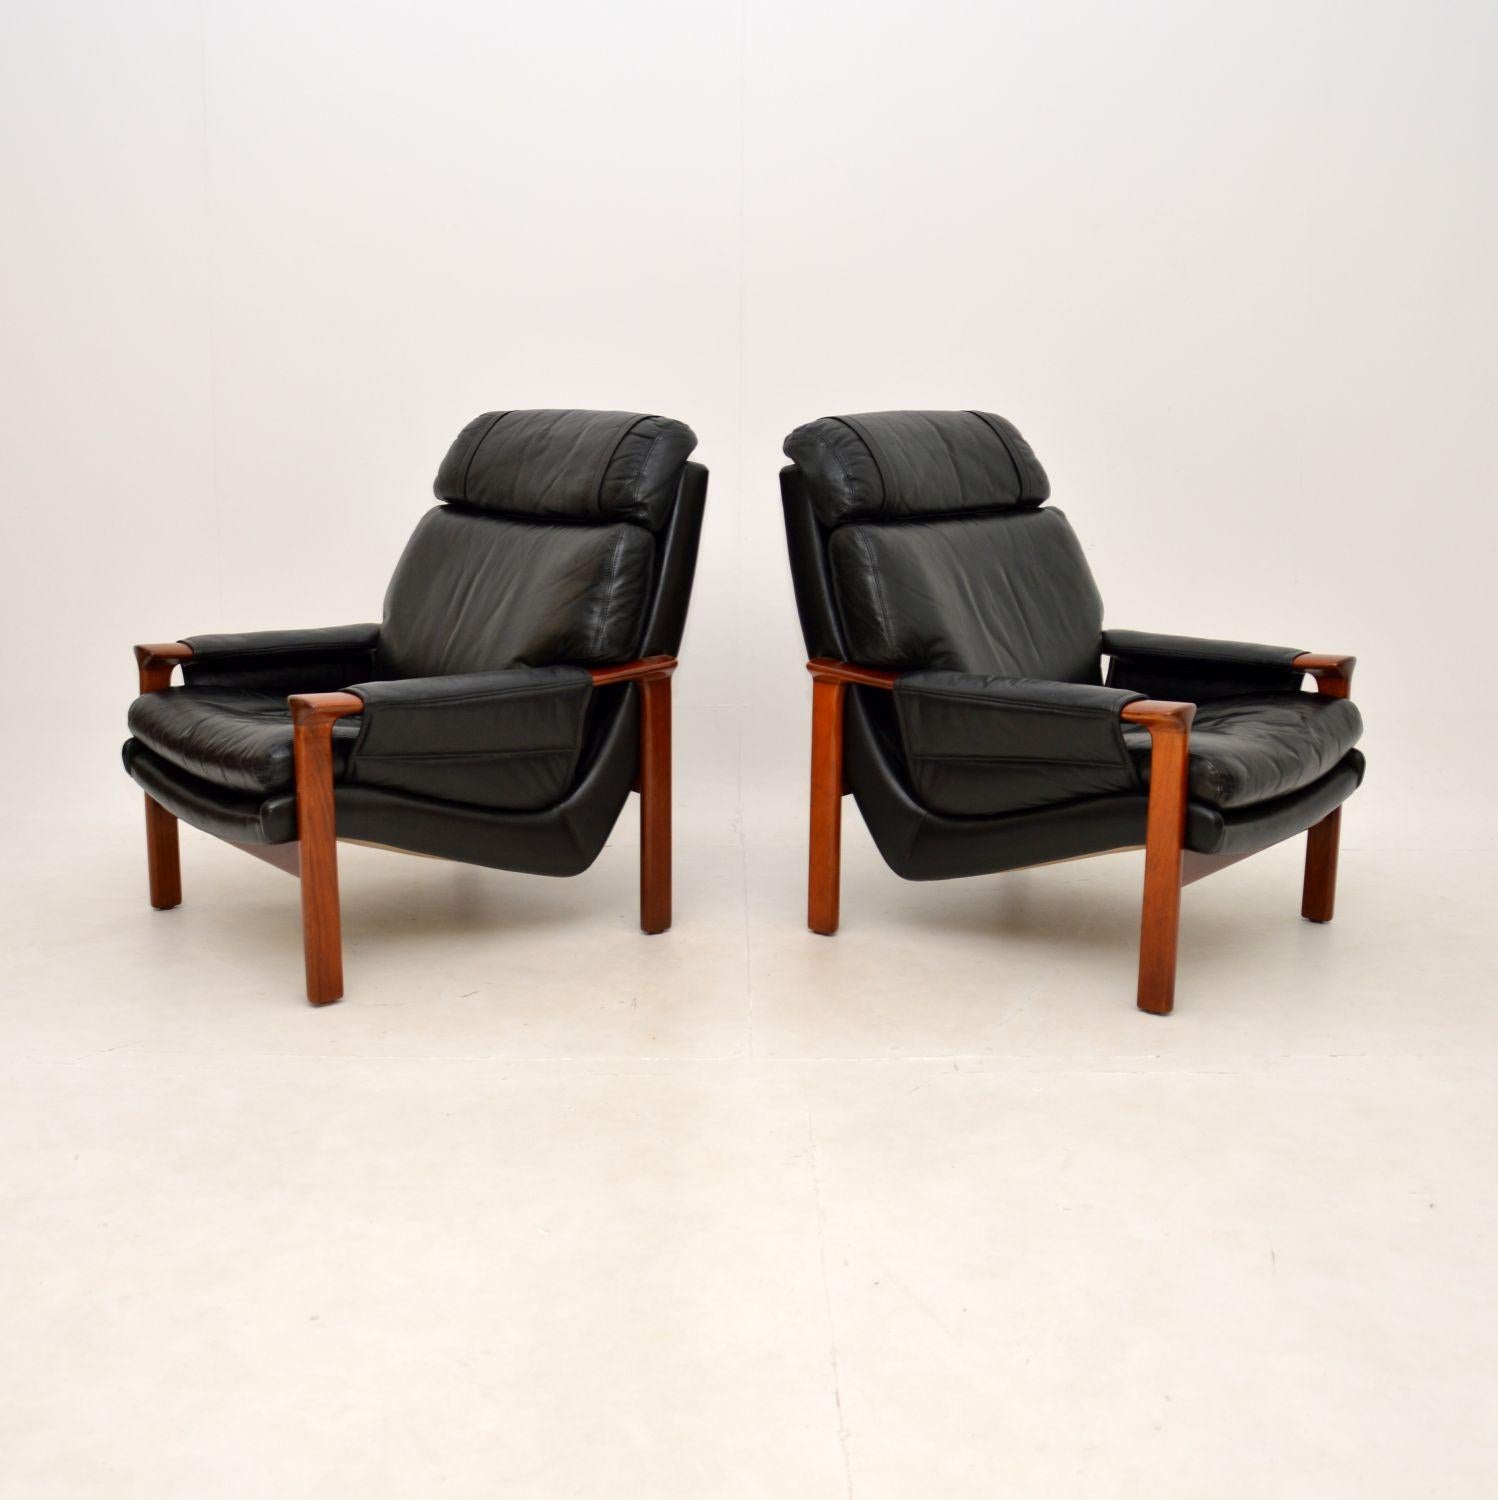 A stylish and extremely comfortable pair of Danish vintage leather armchairs, dating from around the 1960-70’s.

They are of superb quality, very well made, generous and unbelievably comfortable to relax in. The frames have a lovely design and